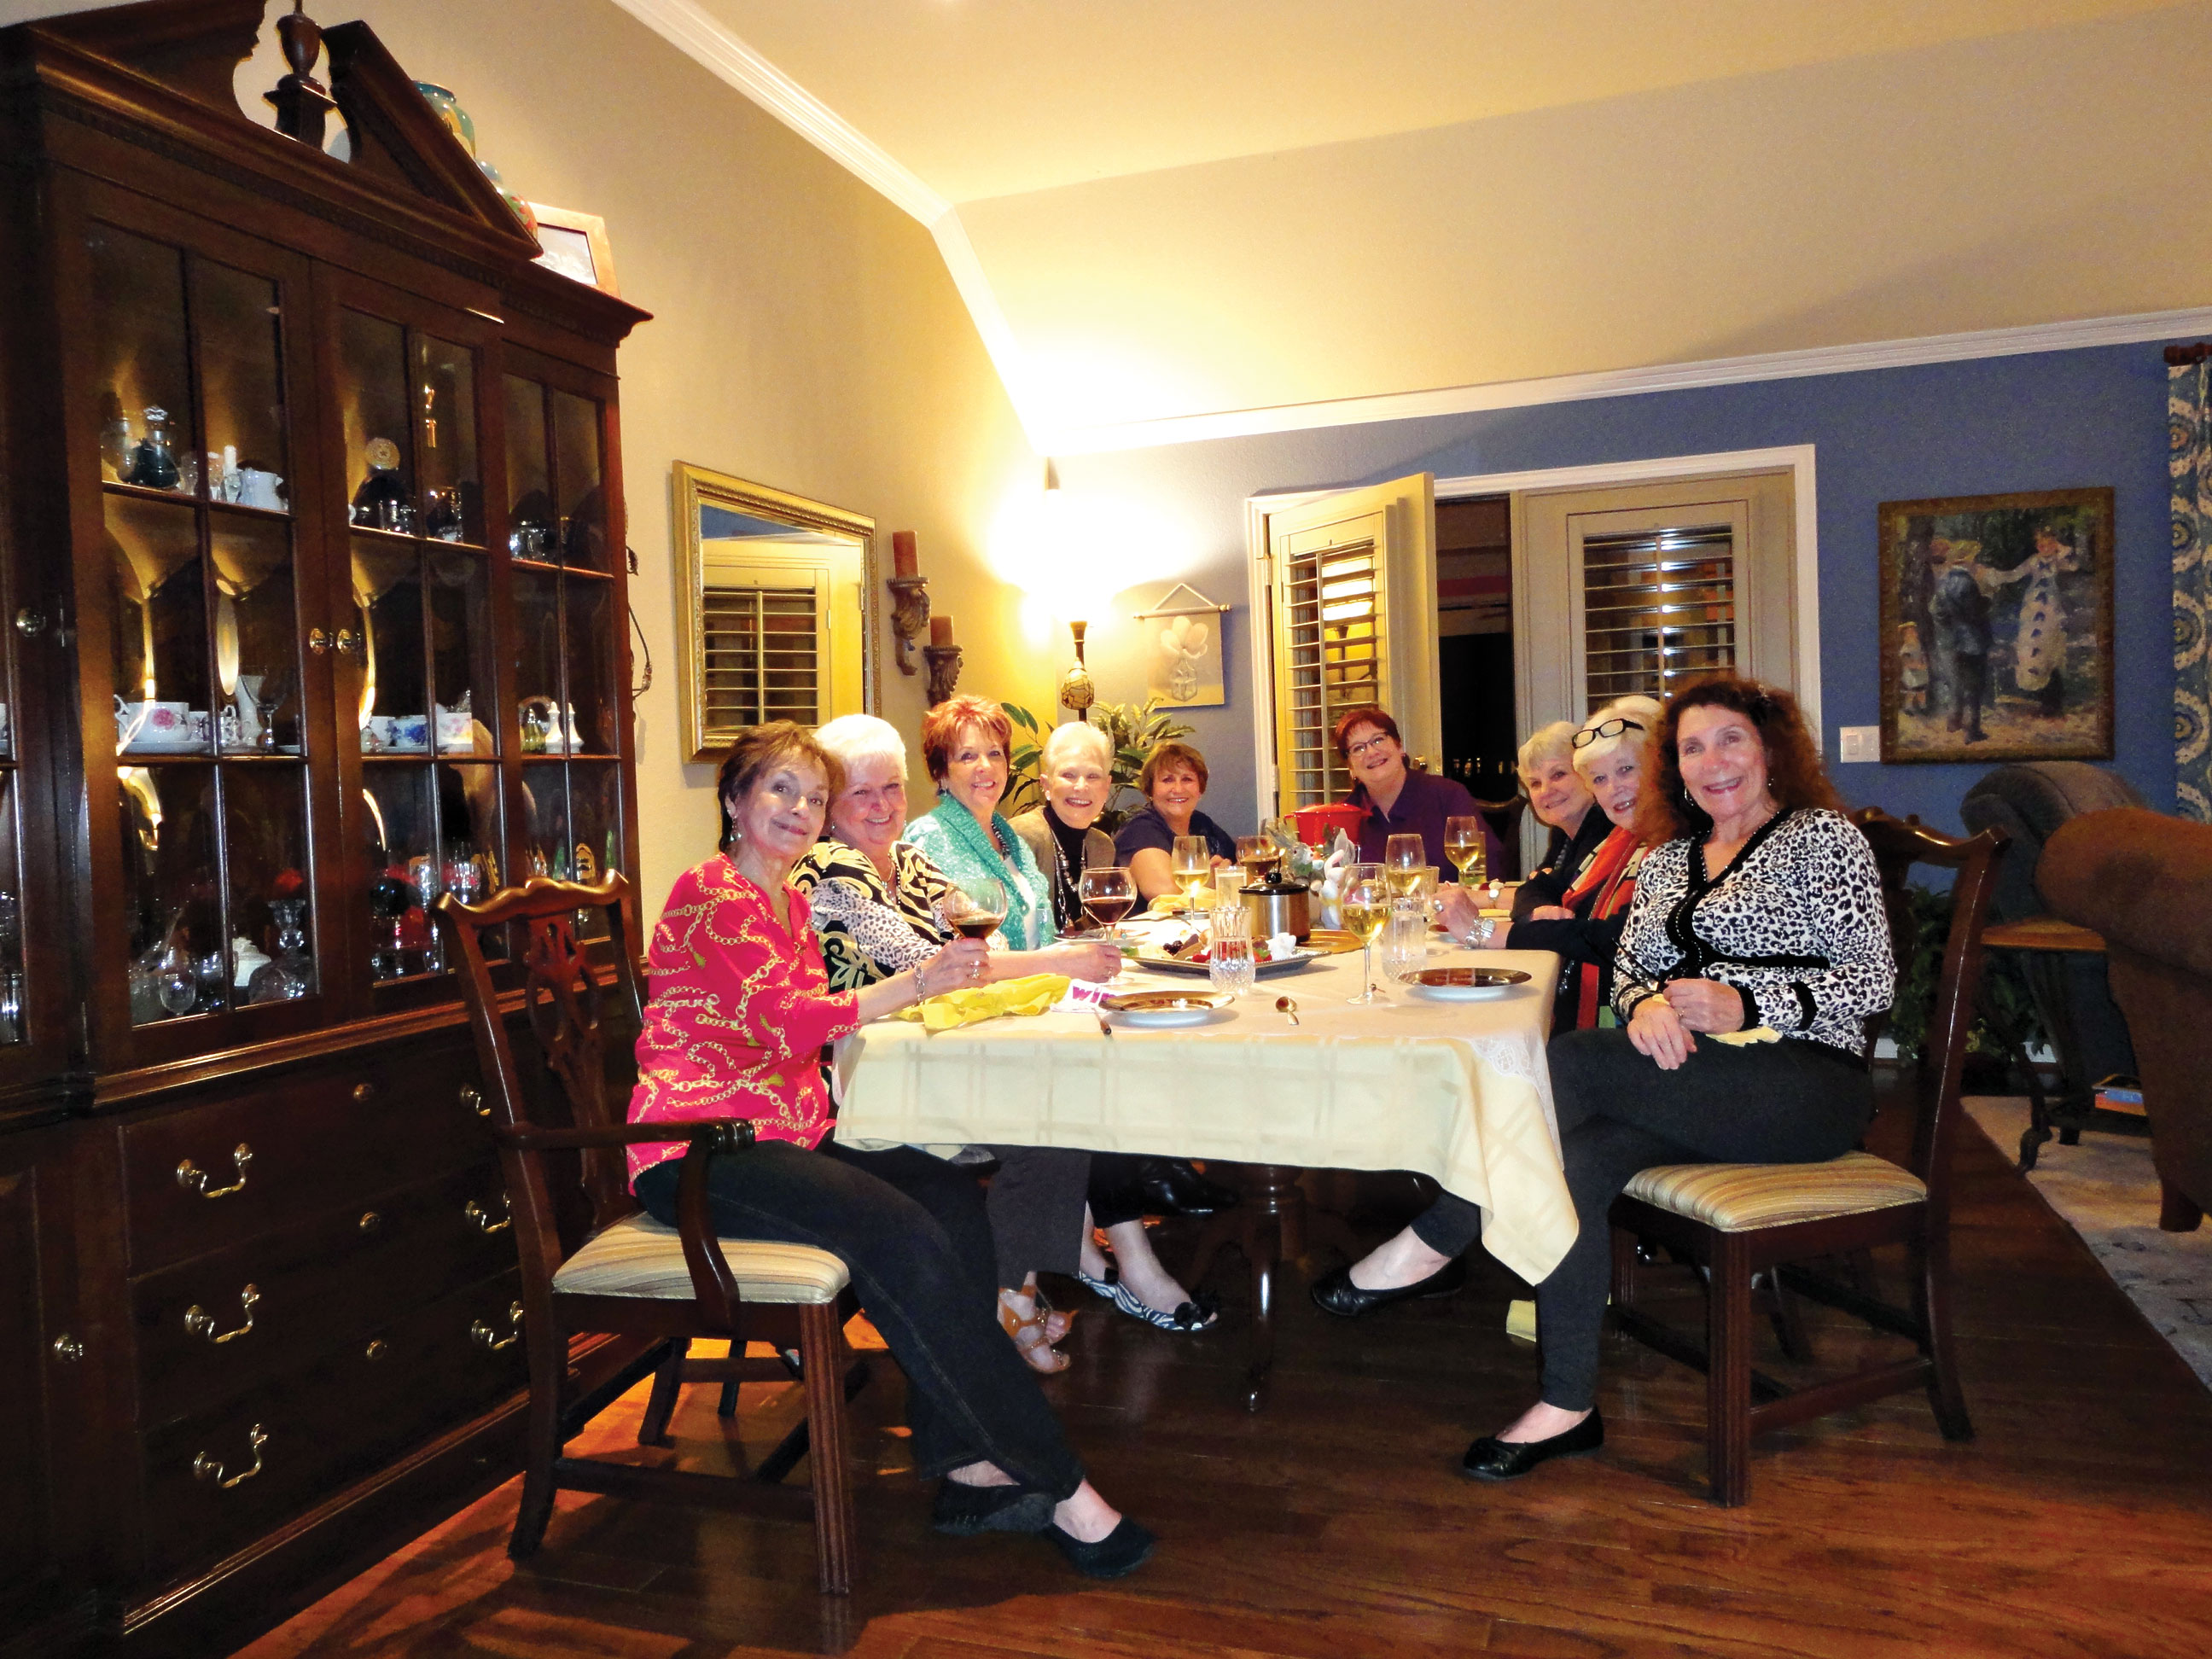 All the LOLs fondued and filled the room with laughter and anticipation of their next gathering. LtoR around the table are: Peggy Crandell, Sally Baggott, MaryAnn Carroll, Glenda Brown, Carol Cieslik, Gayle Cole, Jan Utzman, Joan Krause and Judy Ondina.